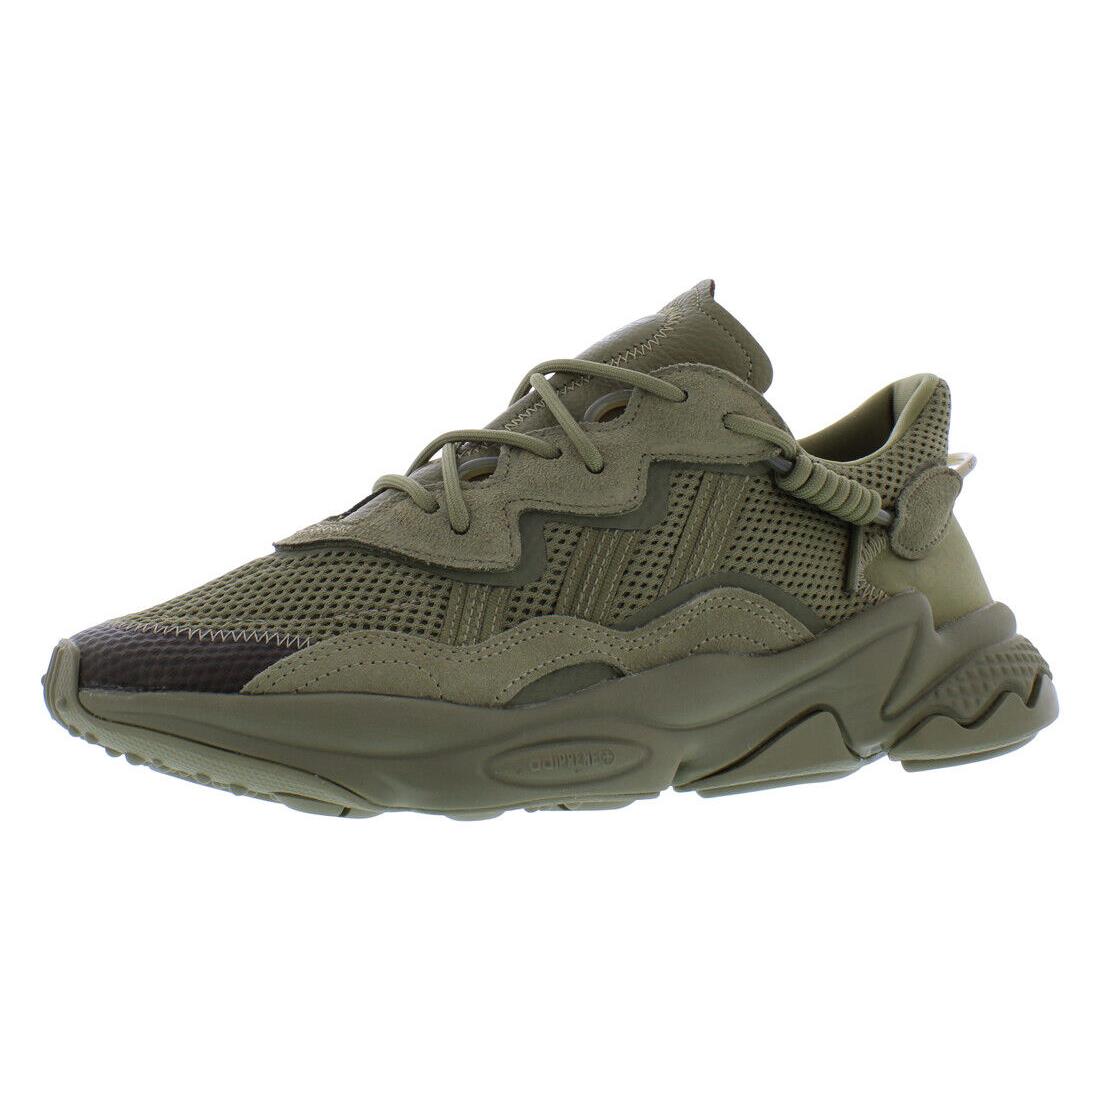 Adidas Ozweego Mens Shoes - Olive, Main: Green